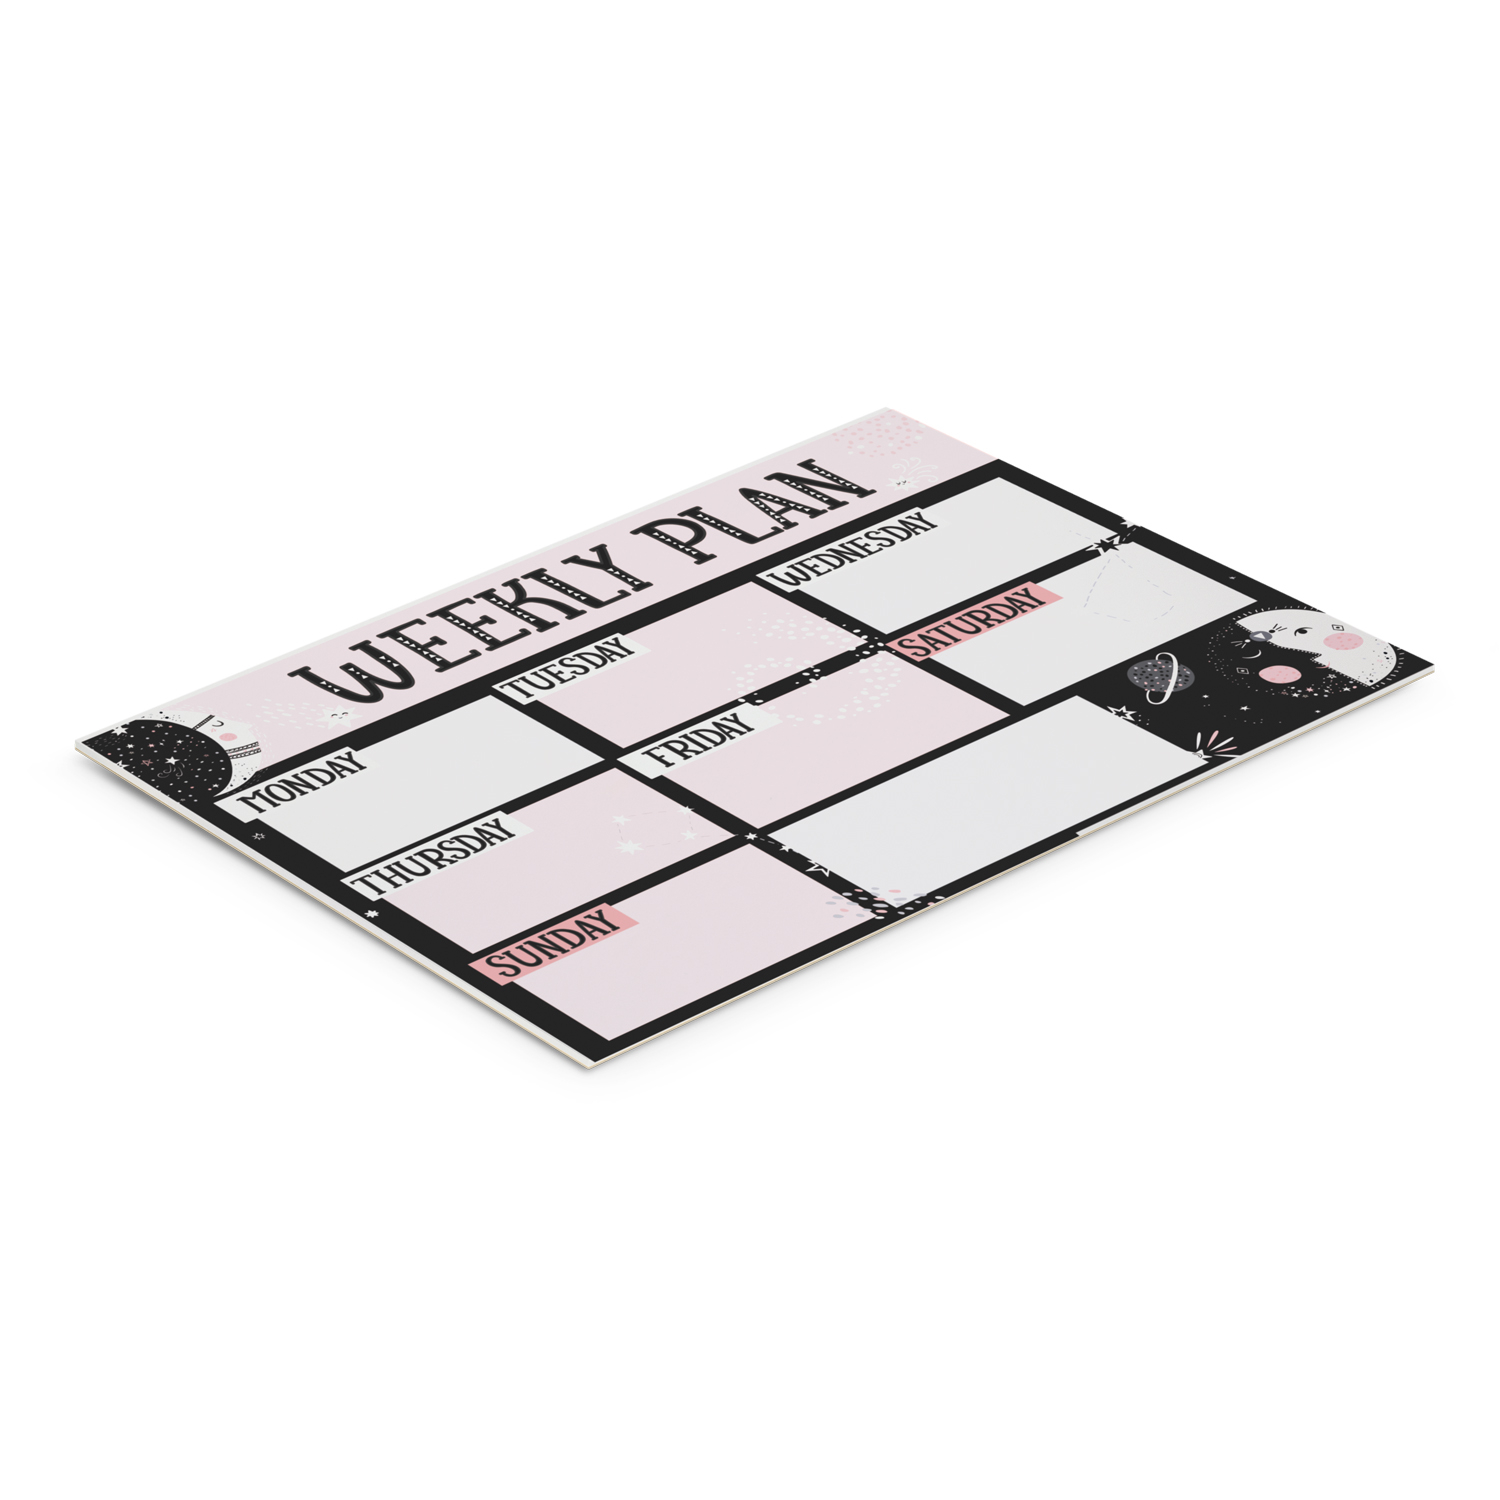 A2 Desk Planner - 50 pagesMOQ 125 units - includes edge to edge, full colour print